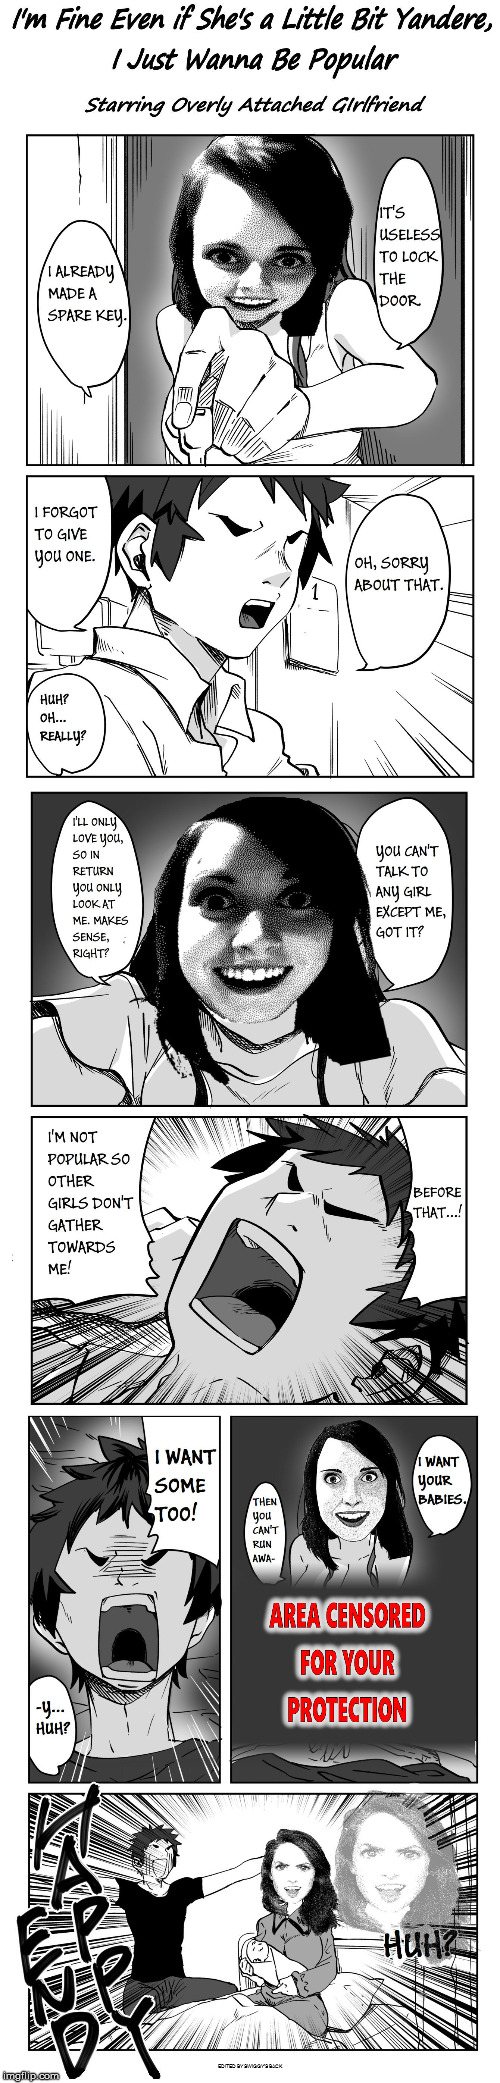 Found a manga that screamed "Overly Attached Girlfriend" Put my Paint Shop Pro to work | EDITED BY SWIGGY'S BACK | image tagged in overly attached girlfriend,manga,yandere | made w/ Imgflip meme maker